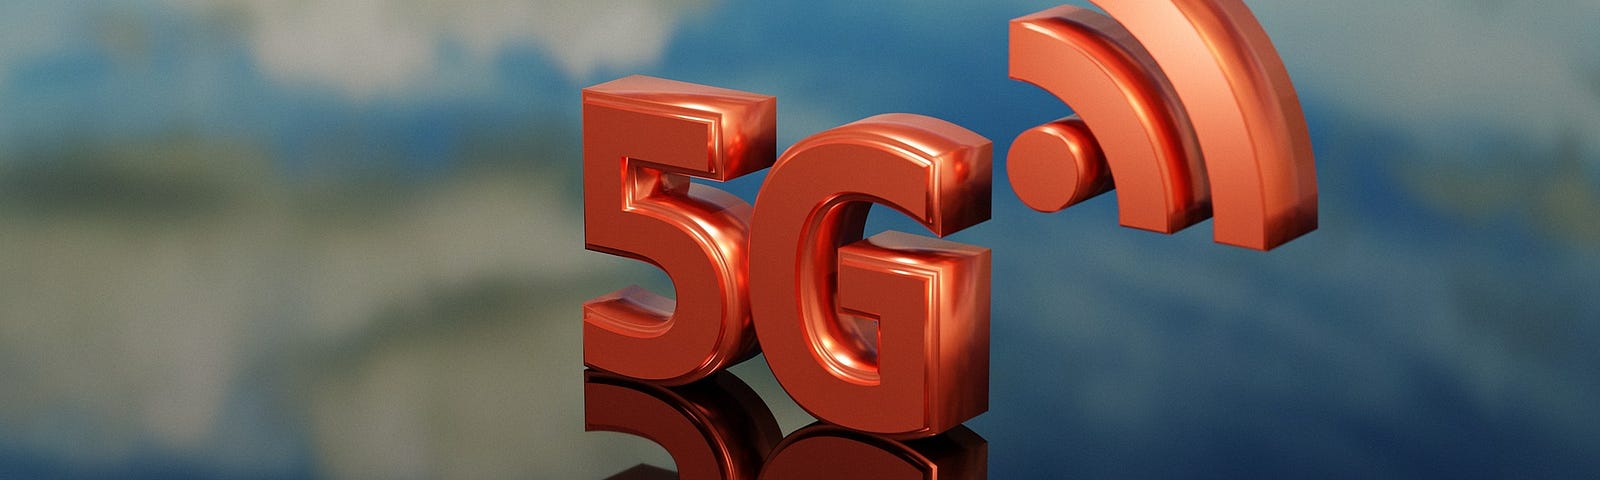 A CGI image with the letters ‘5G’ and a mobile signal graph in red.